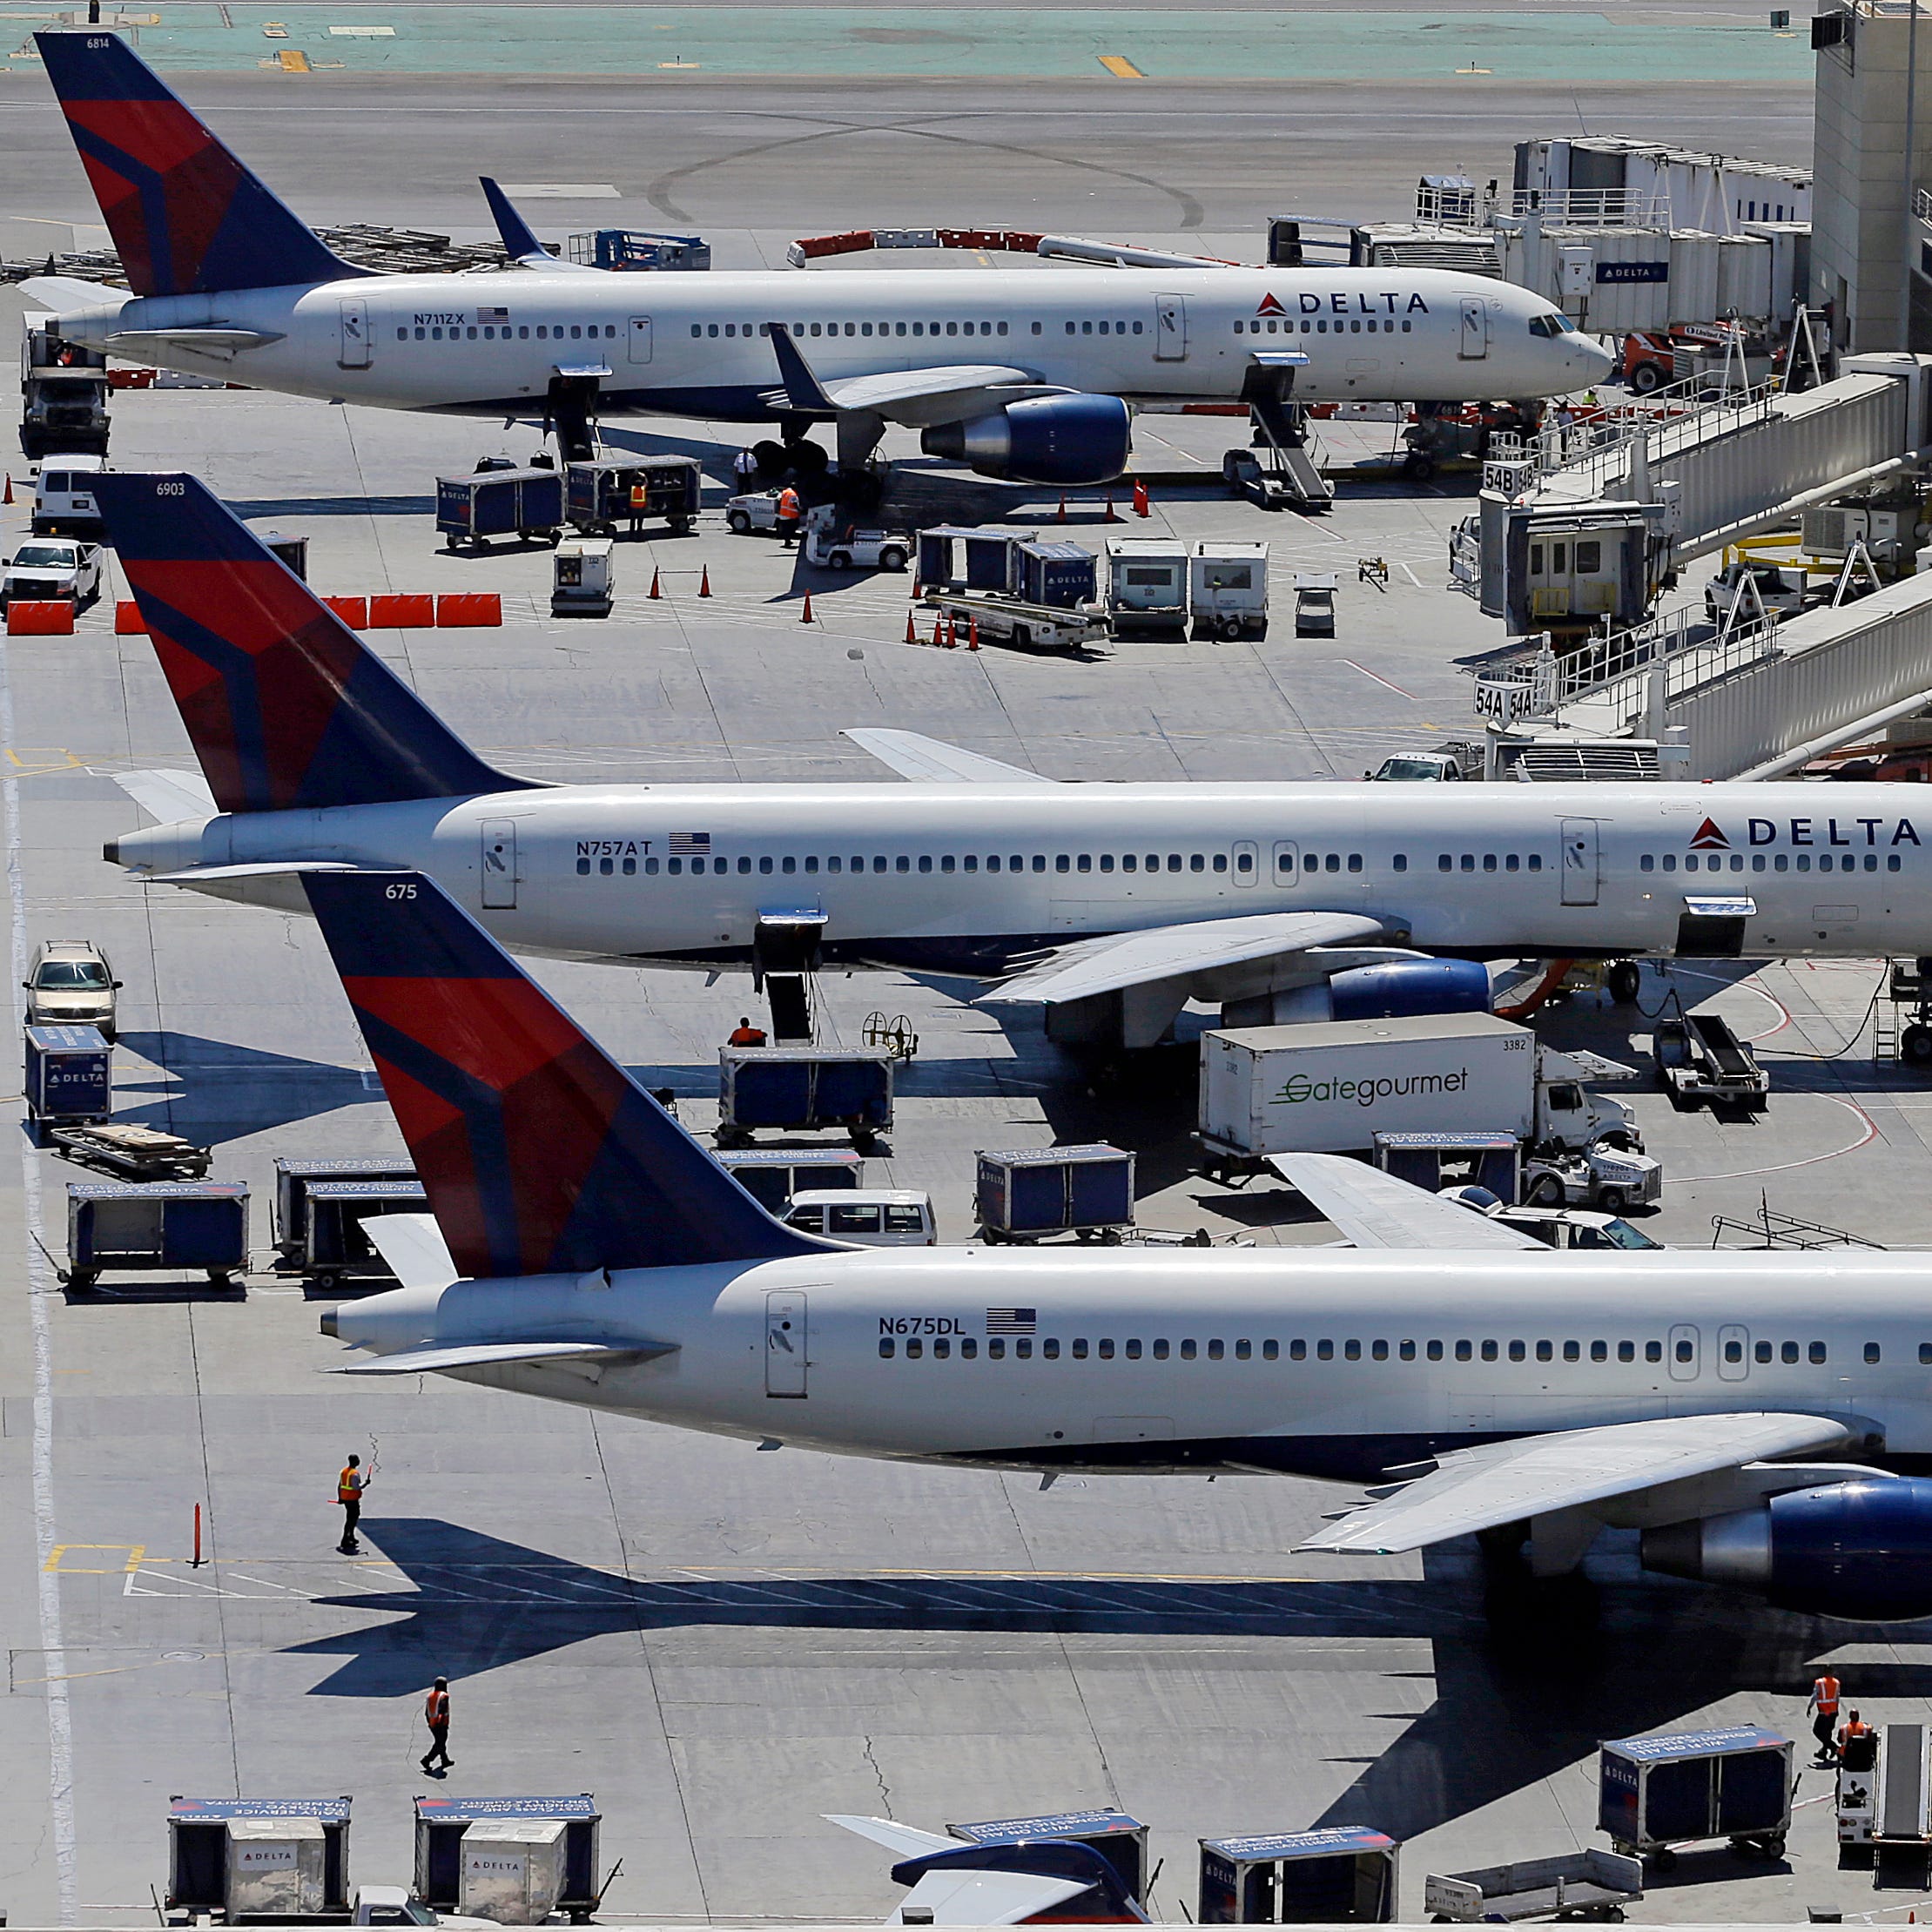 In this Sept. 4, 2013 photo, Delta Airlines jets are seen at a terminal at Los Angeles International Airport (LAX). (AP Photo/Reed Saxon)